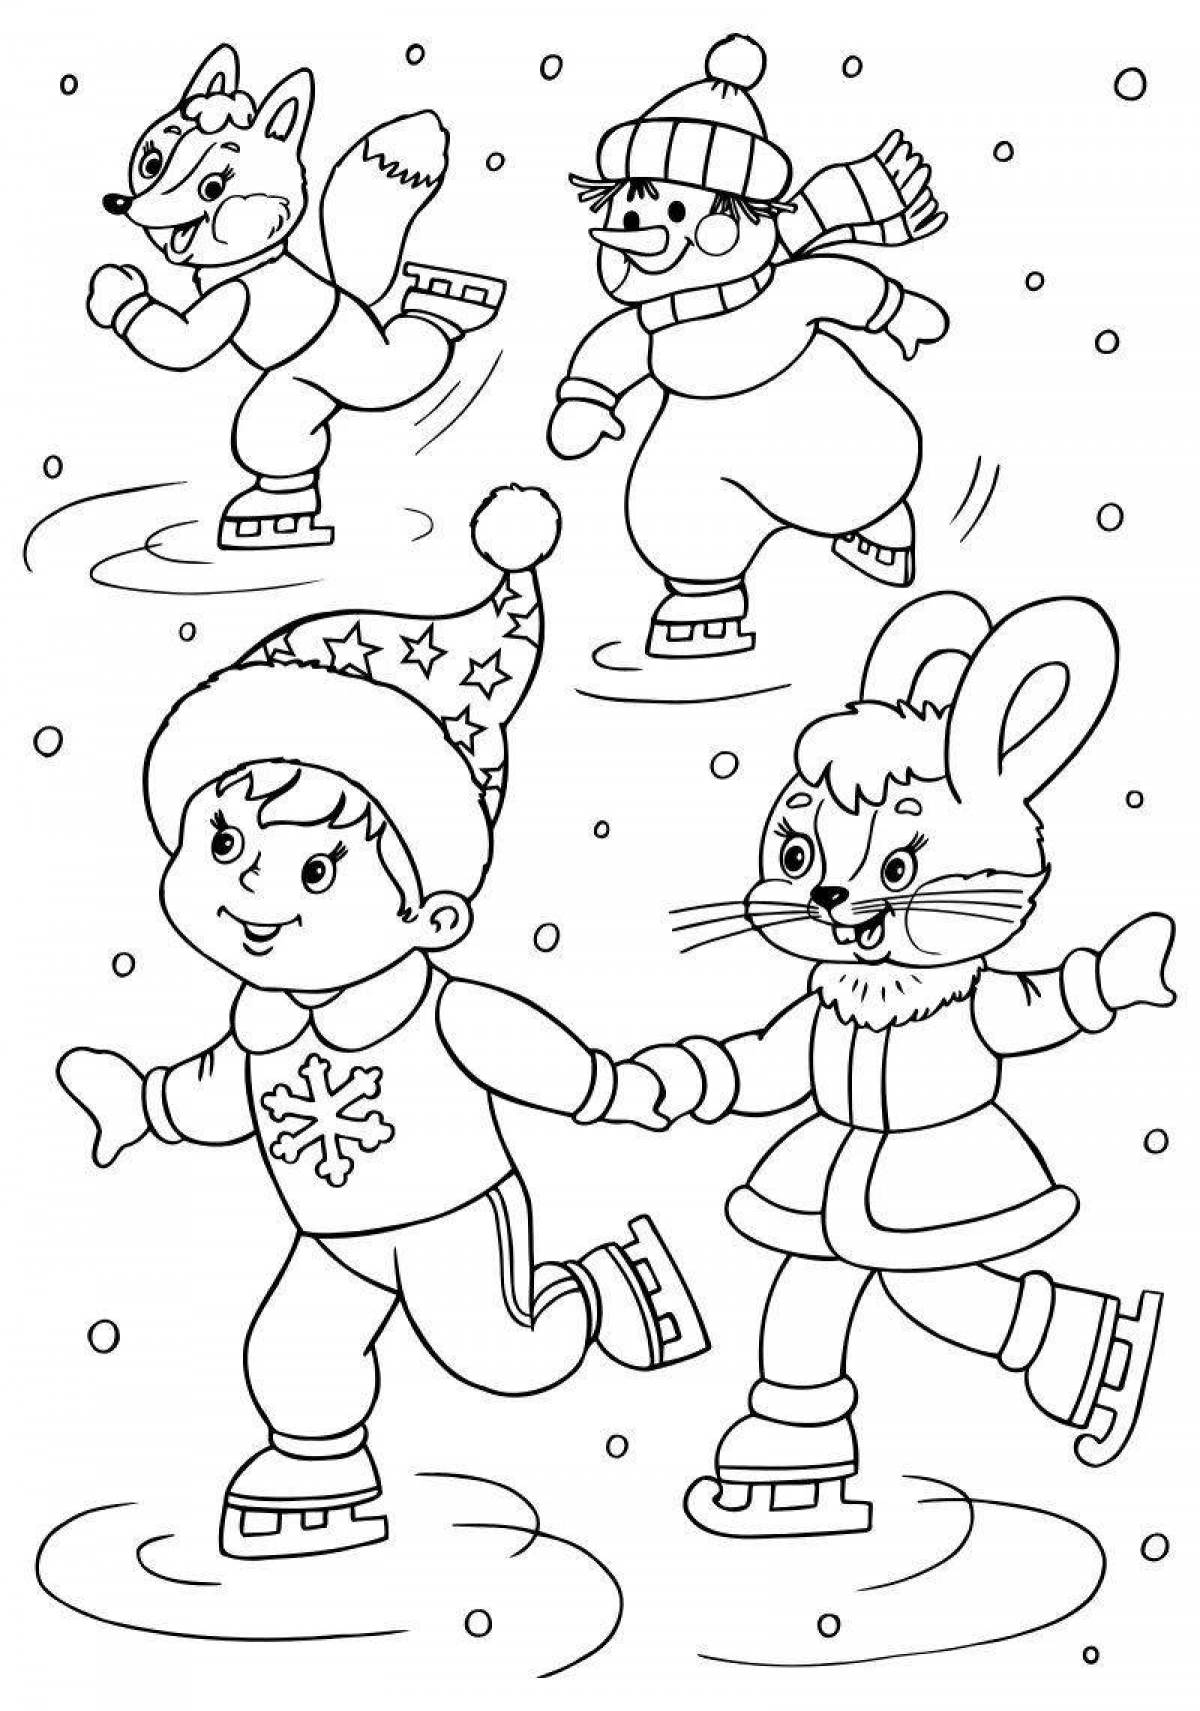 Live winter coloring for kids